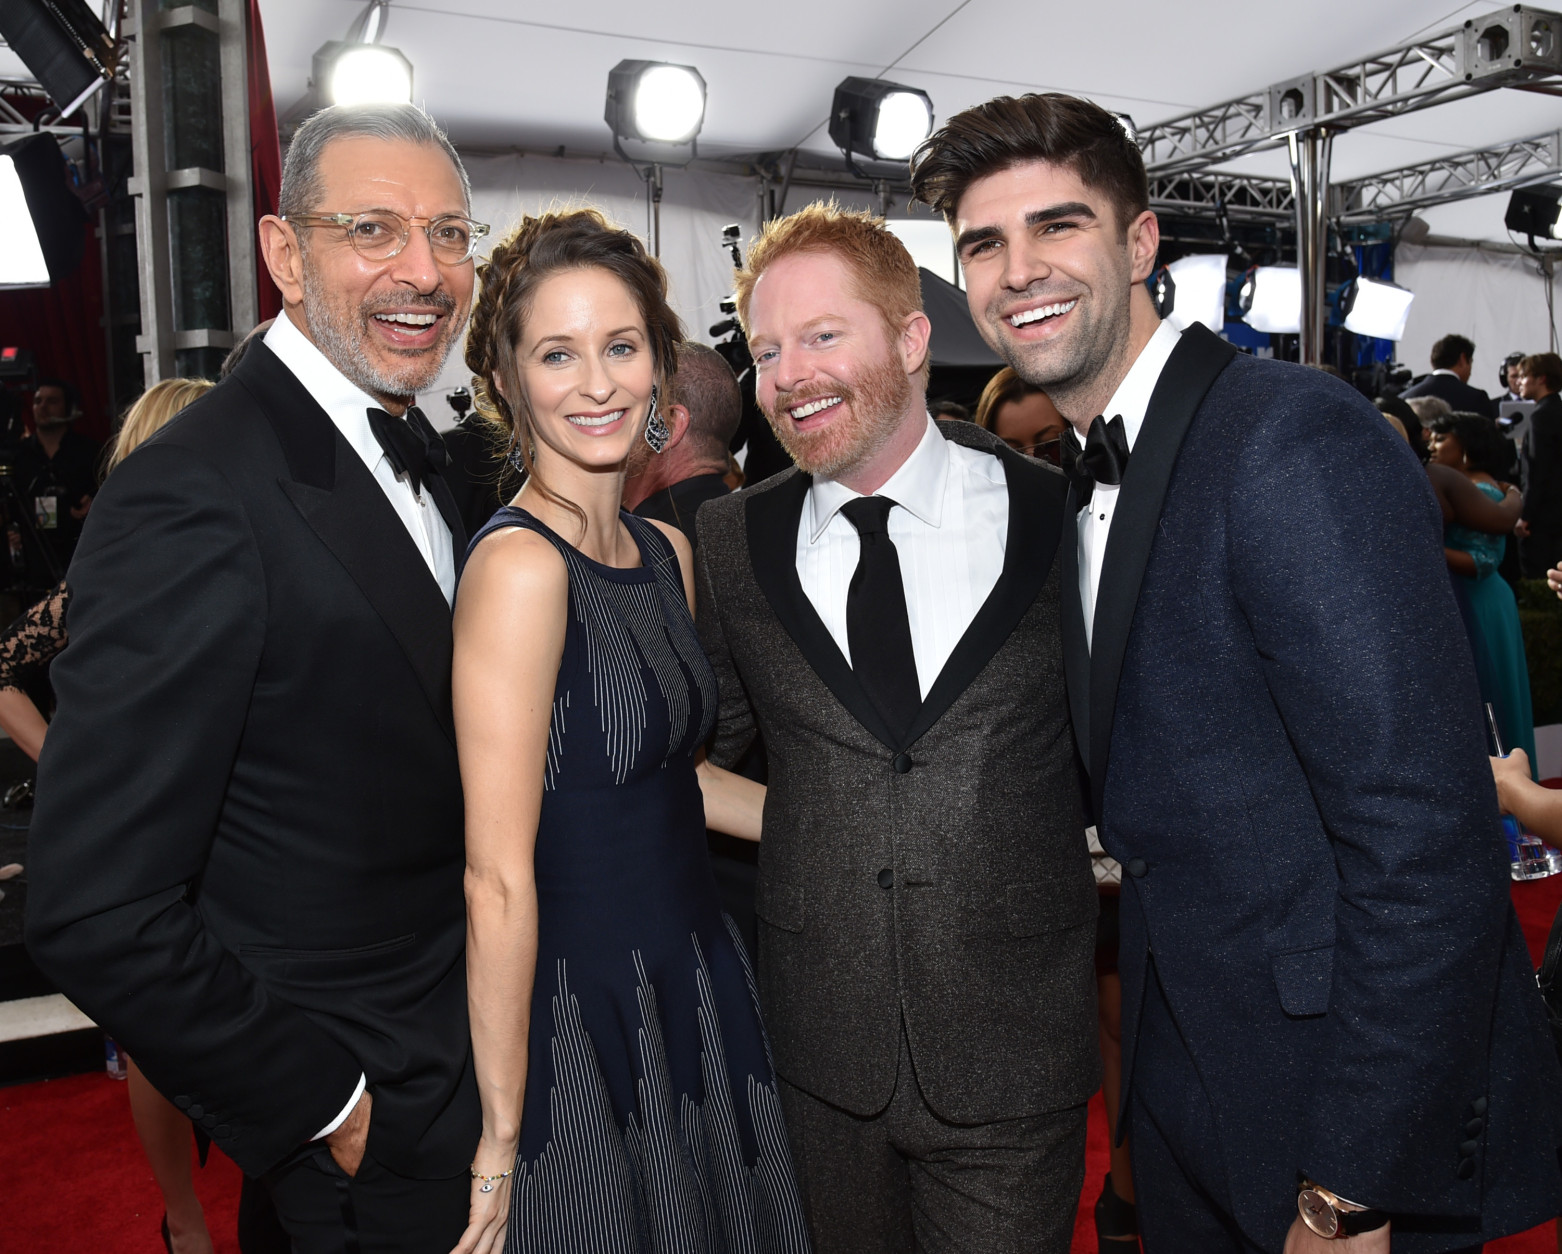 Jeff Goldblum, from left, Emilie Livingston, Jesse Tyler Ferguson and Justin Mikita arrive at the 21st annual Screen Actors Guild Awards at the Shrine Auditorium on Sunday, Jan. 25, 2015, in Los Angeles. (Photo by John Shearer/Invision/AP)